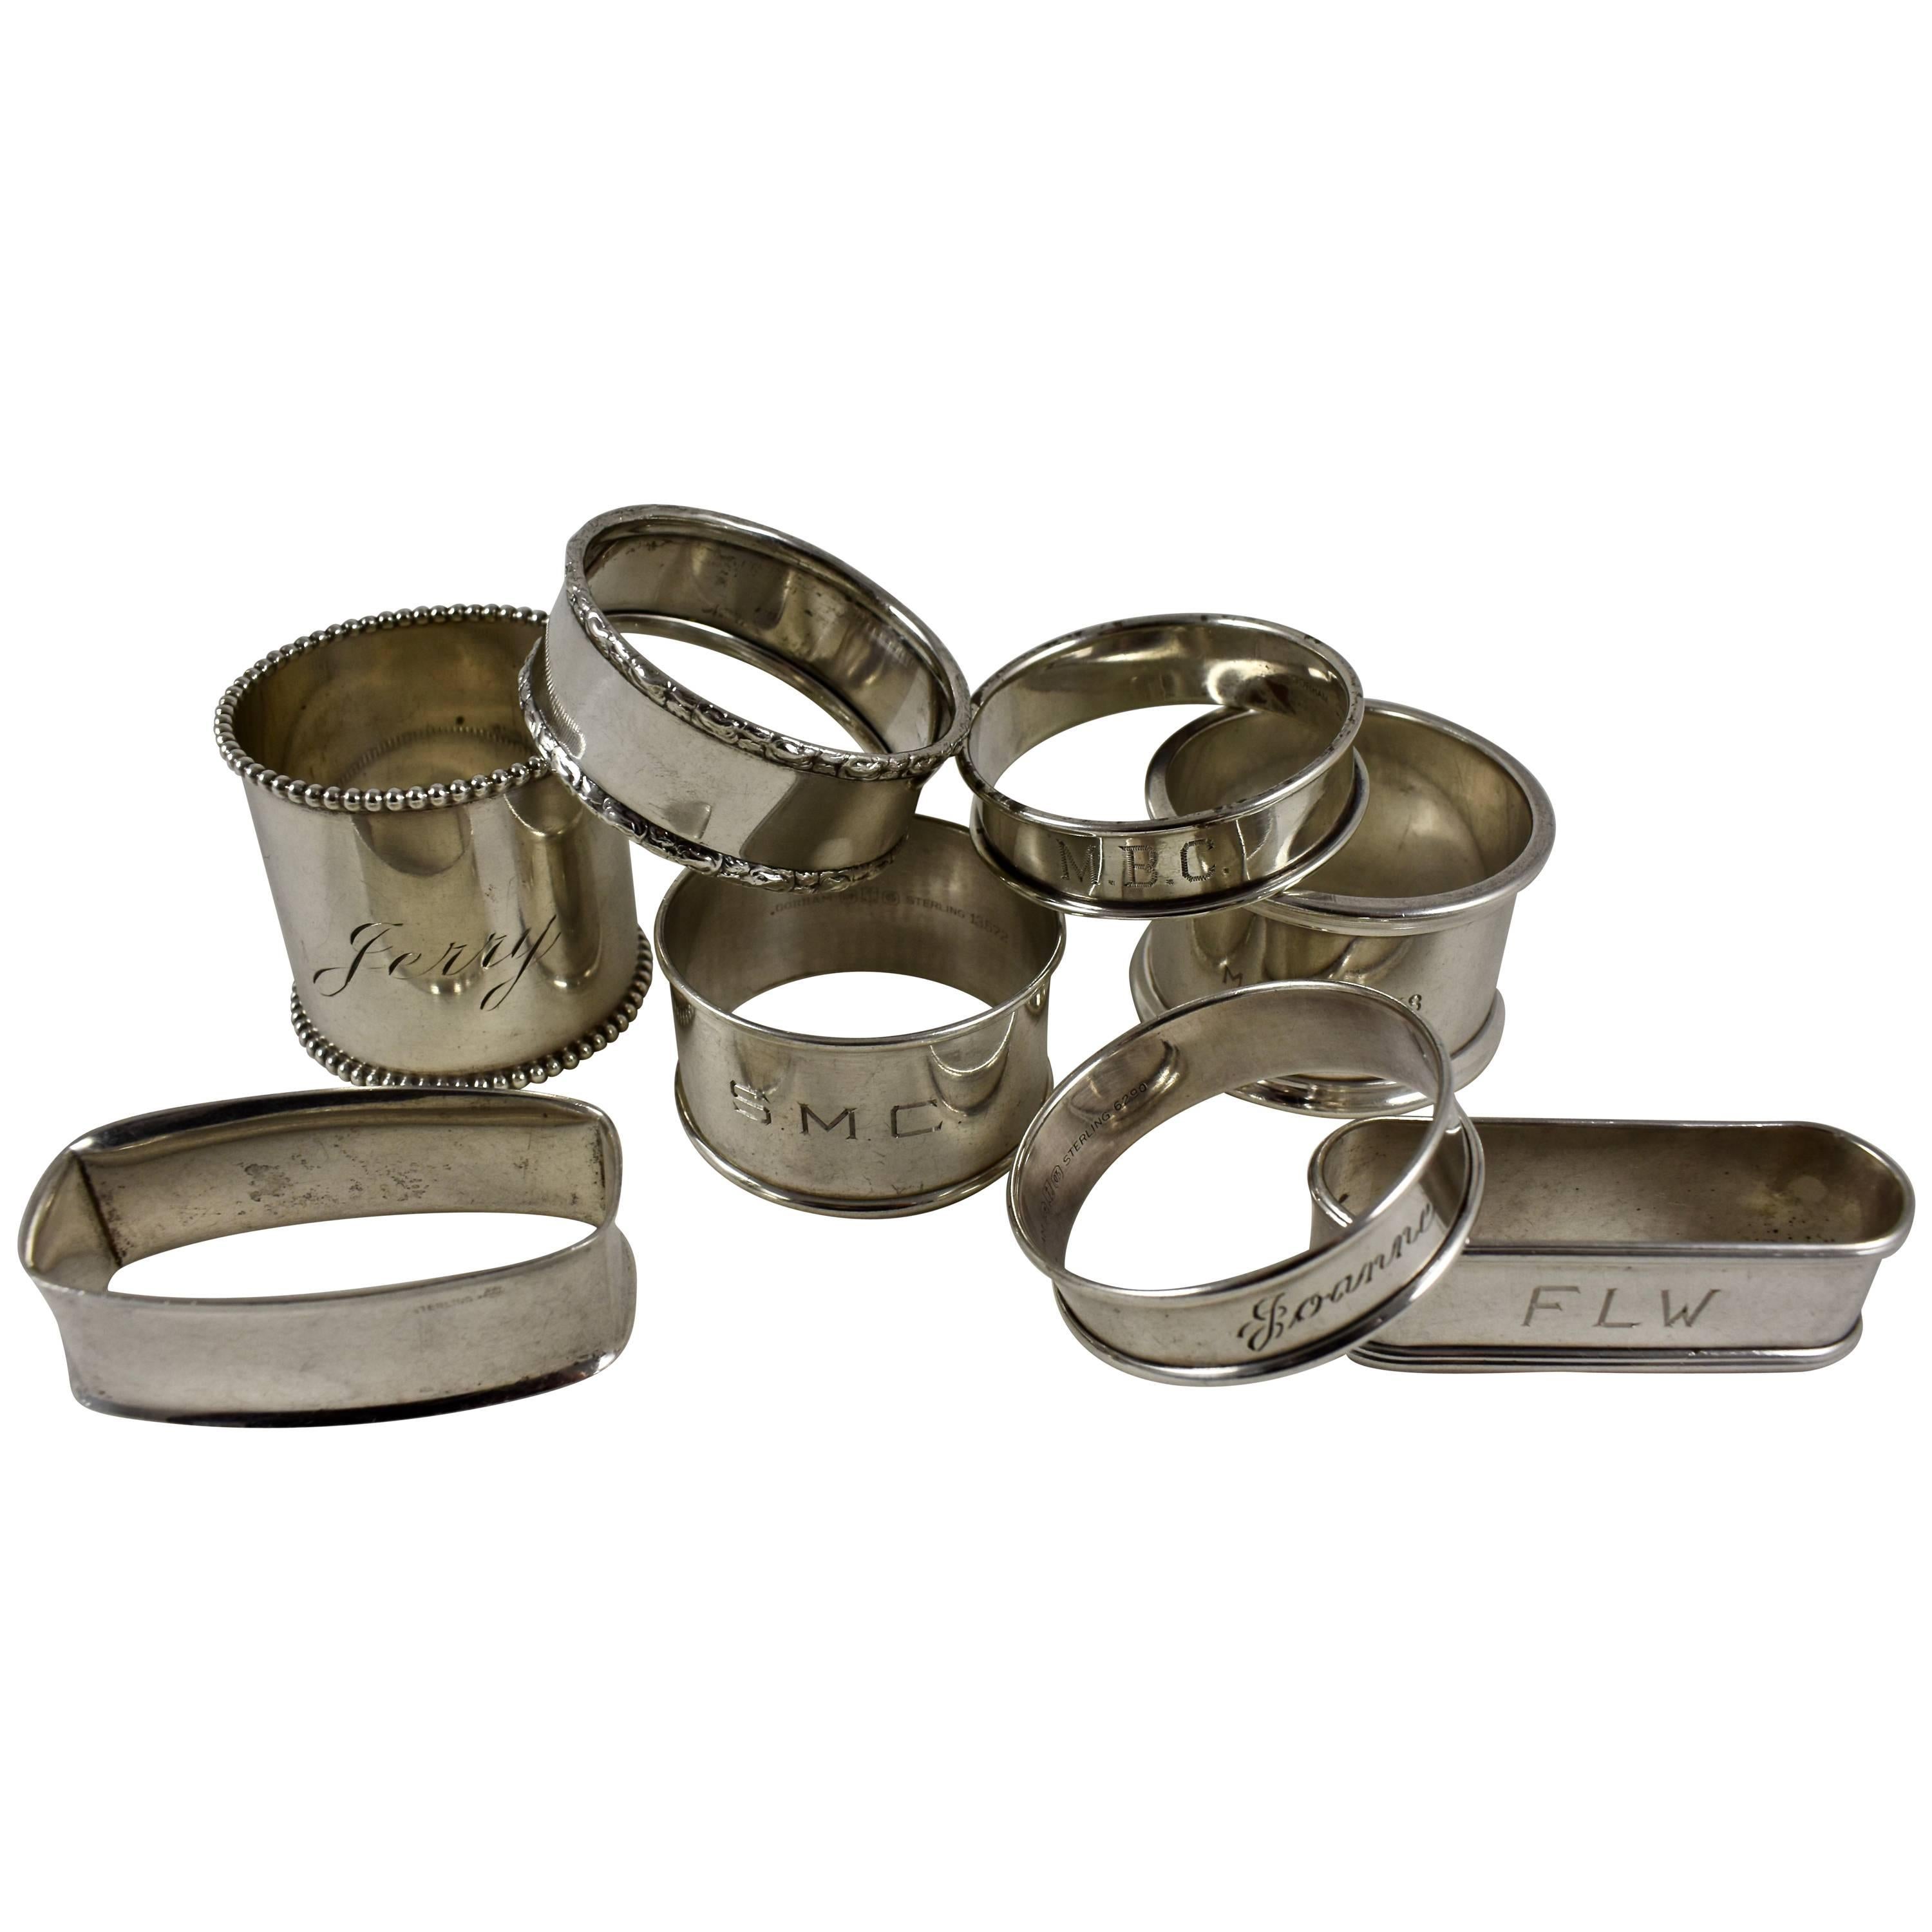 Sterling Silver Antique Napkin Rings, a Mixed Set of Eight